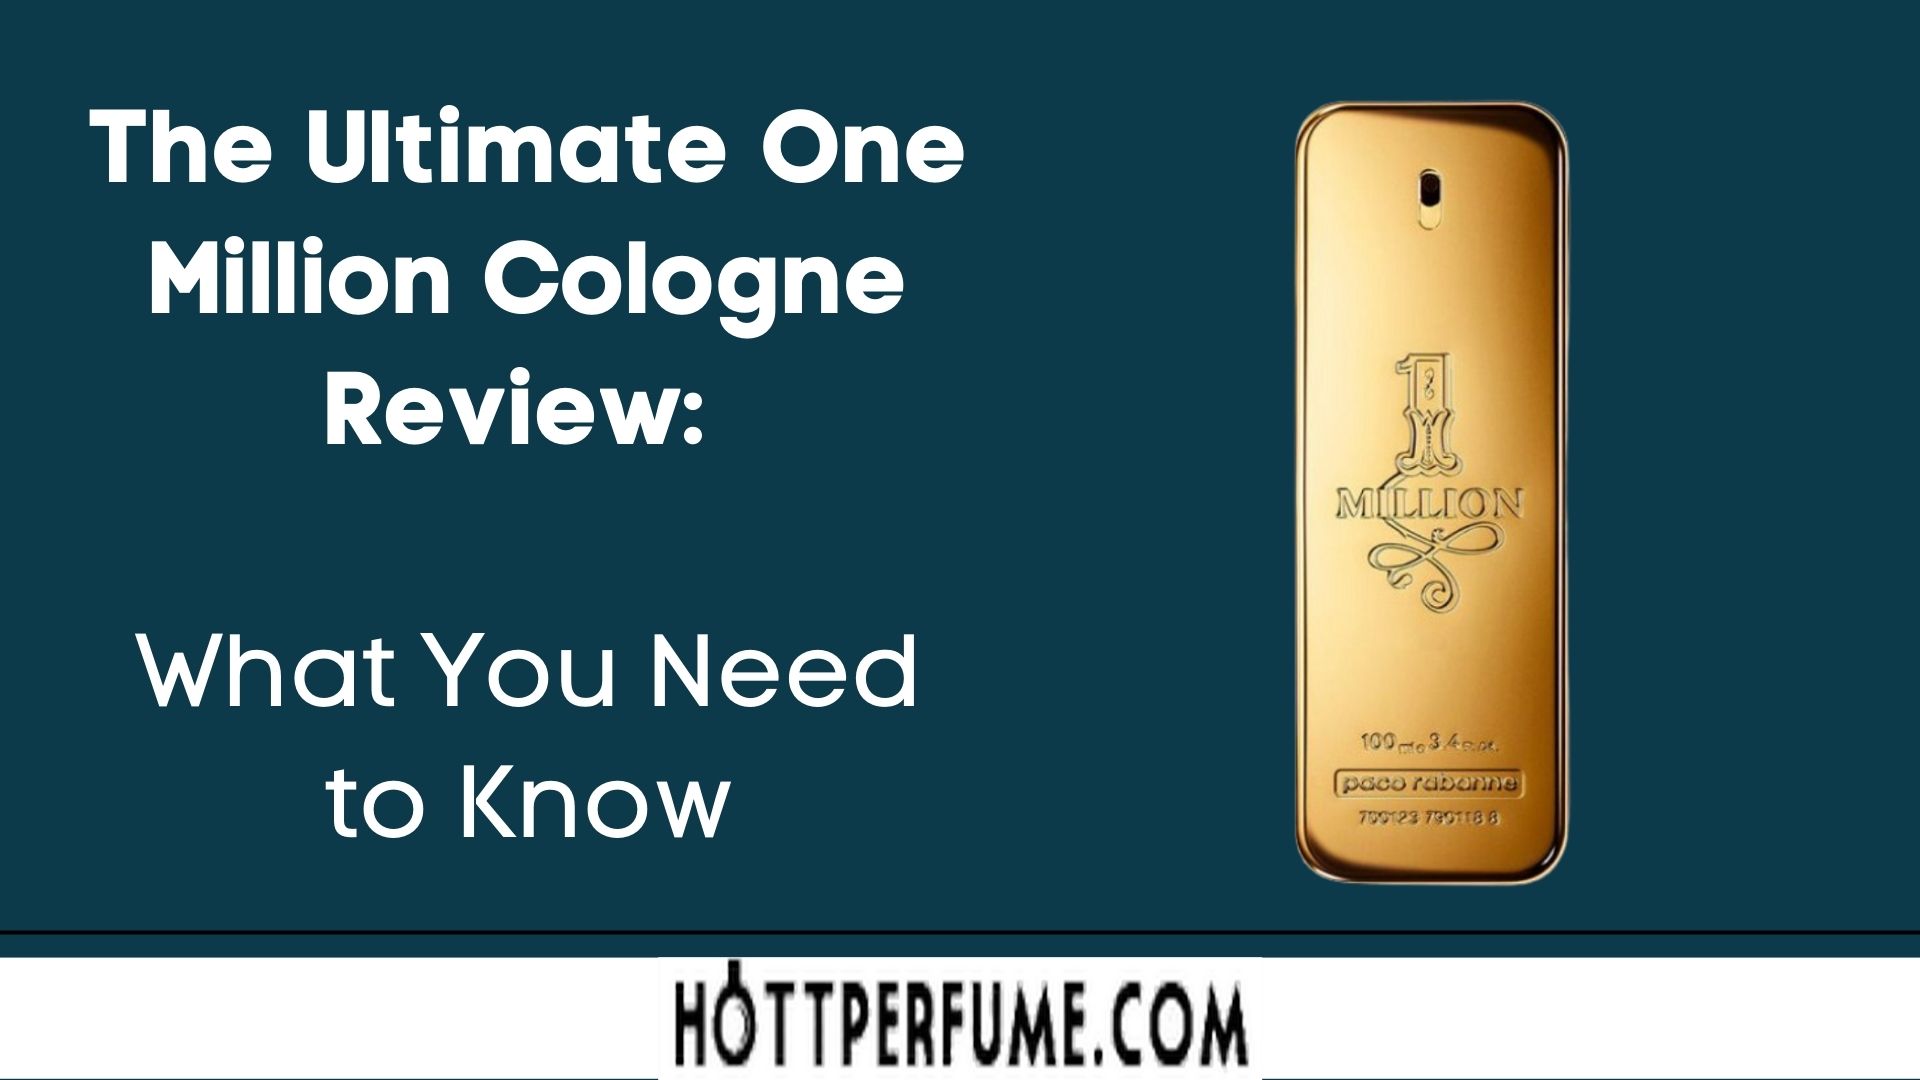 The Ultimate One Million Cologne Review 